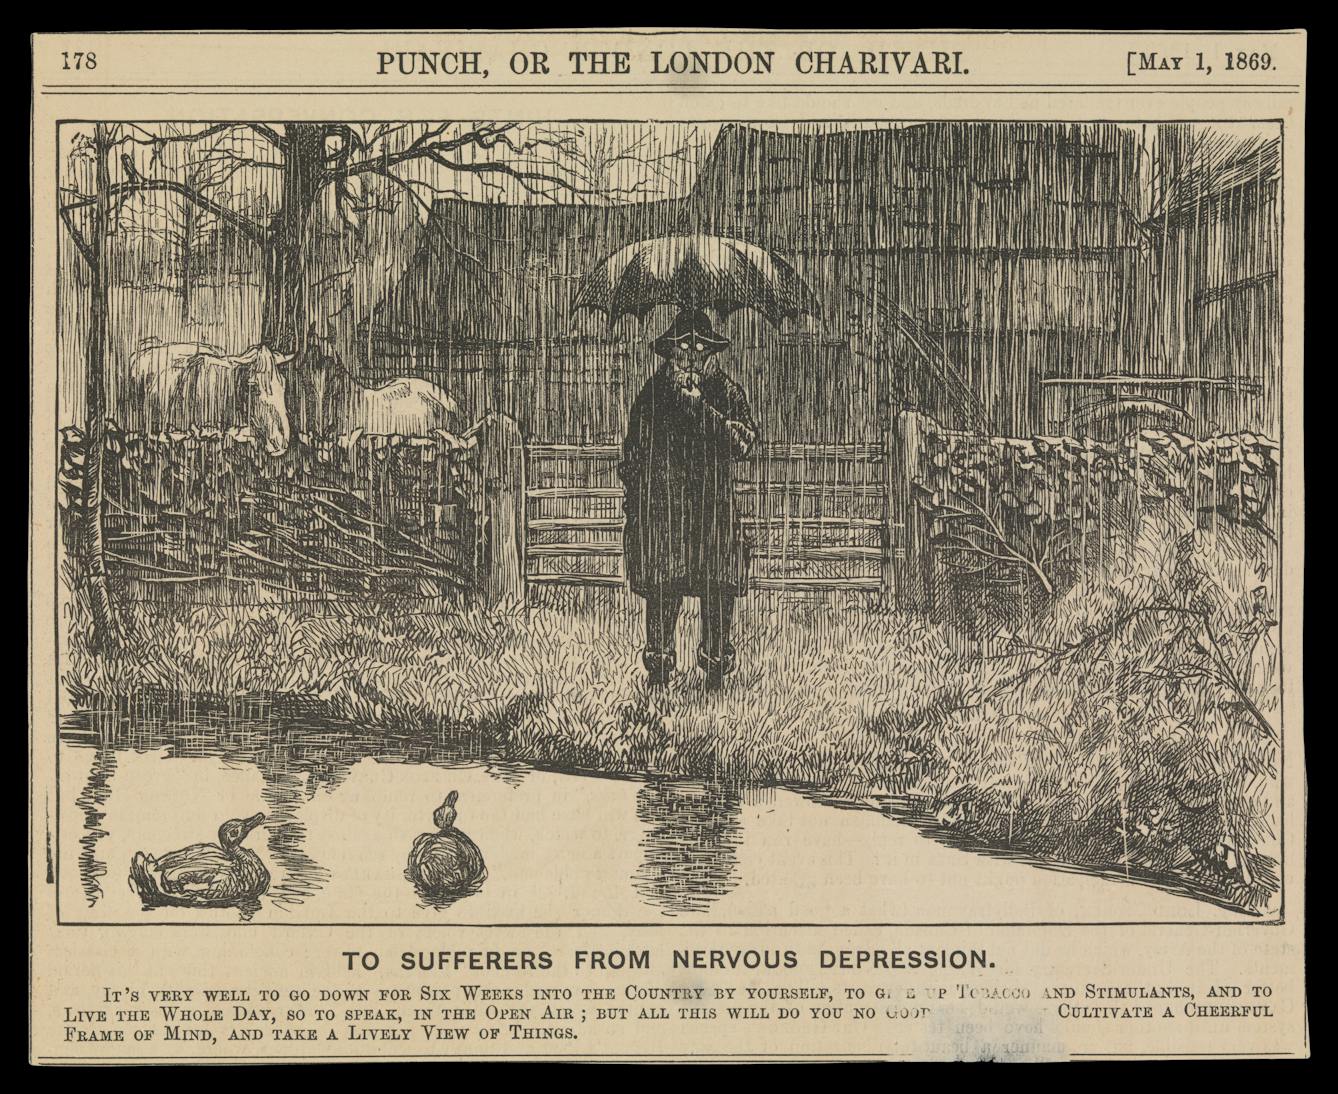 Photograph of a wood engraving from a 1869 newspaper, showing a depressive man holding an umbrella, standing by a country pond in the pouring rain. Beneath the engraving is the title, ‘To sufferers from nervous depression’.